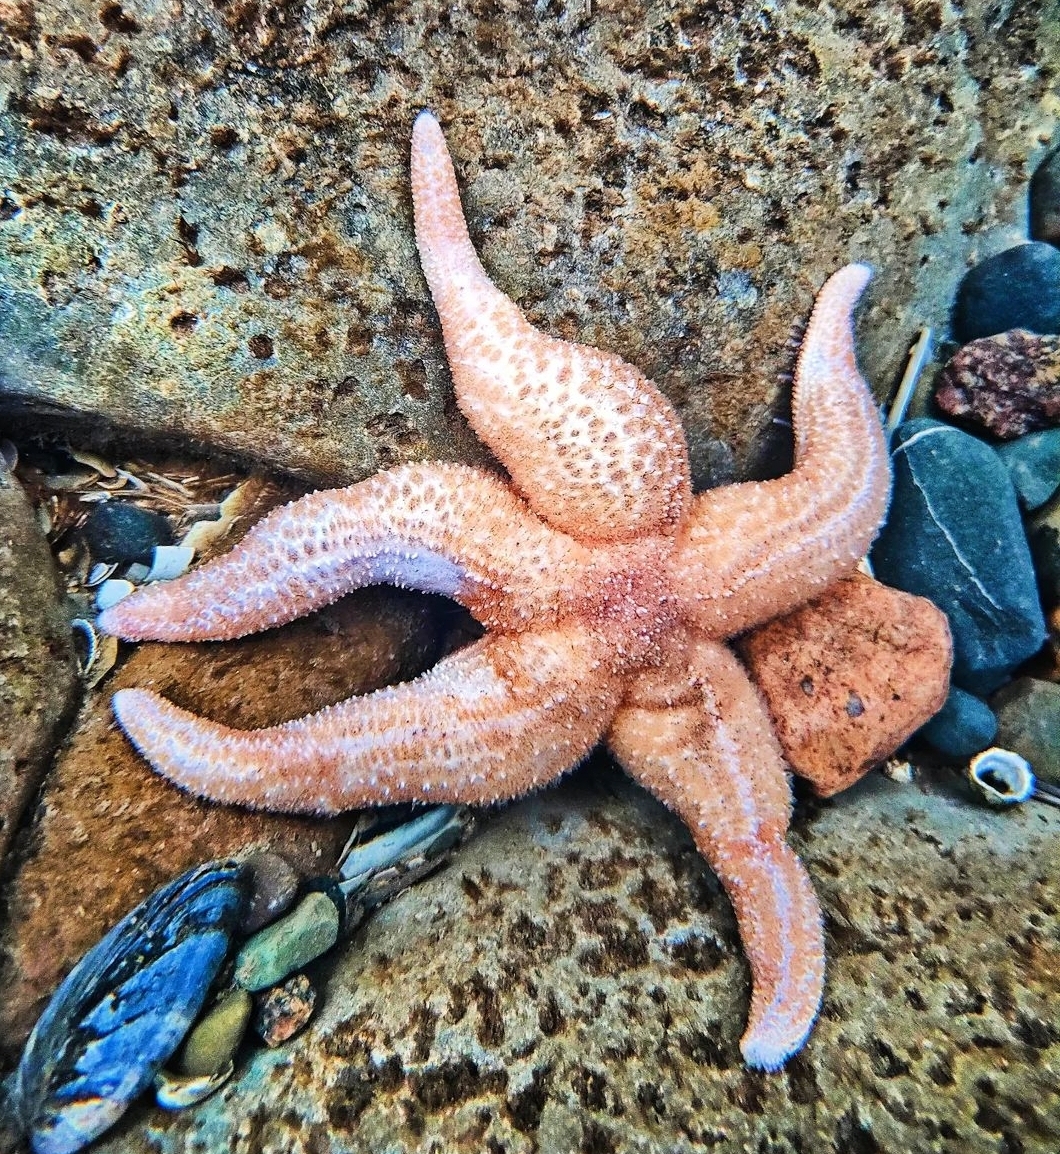 A very chunky starfish. This was Kimberley’s first underwater photograph and was taken in New Brighton